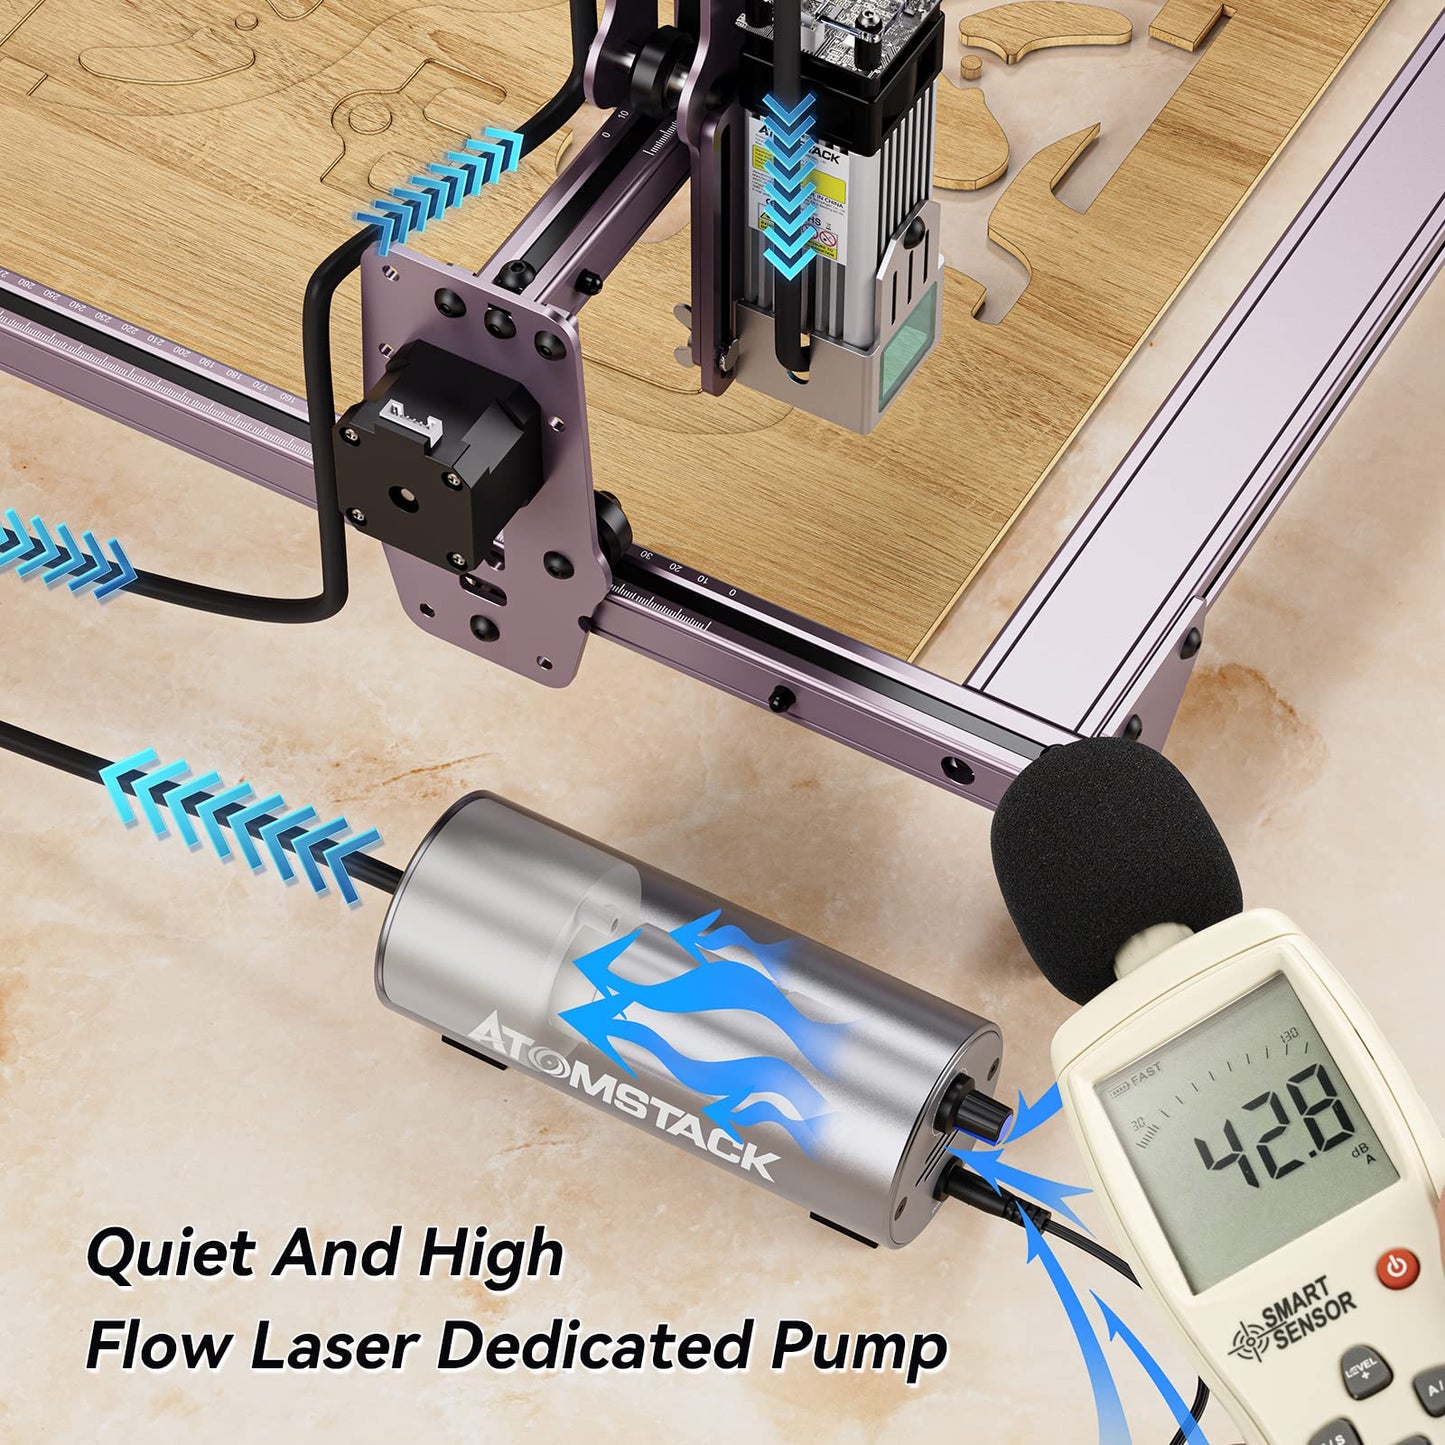 ATOMSTACK A10 Pro/X7 Pro/S10 Pro Laser Engraver and Cutter with F30 Air Assist, 10W Laser Engraving and Cutting Machine with 0.06 * 0.08mm Compressed